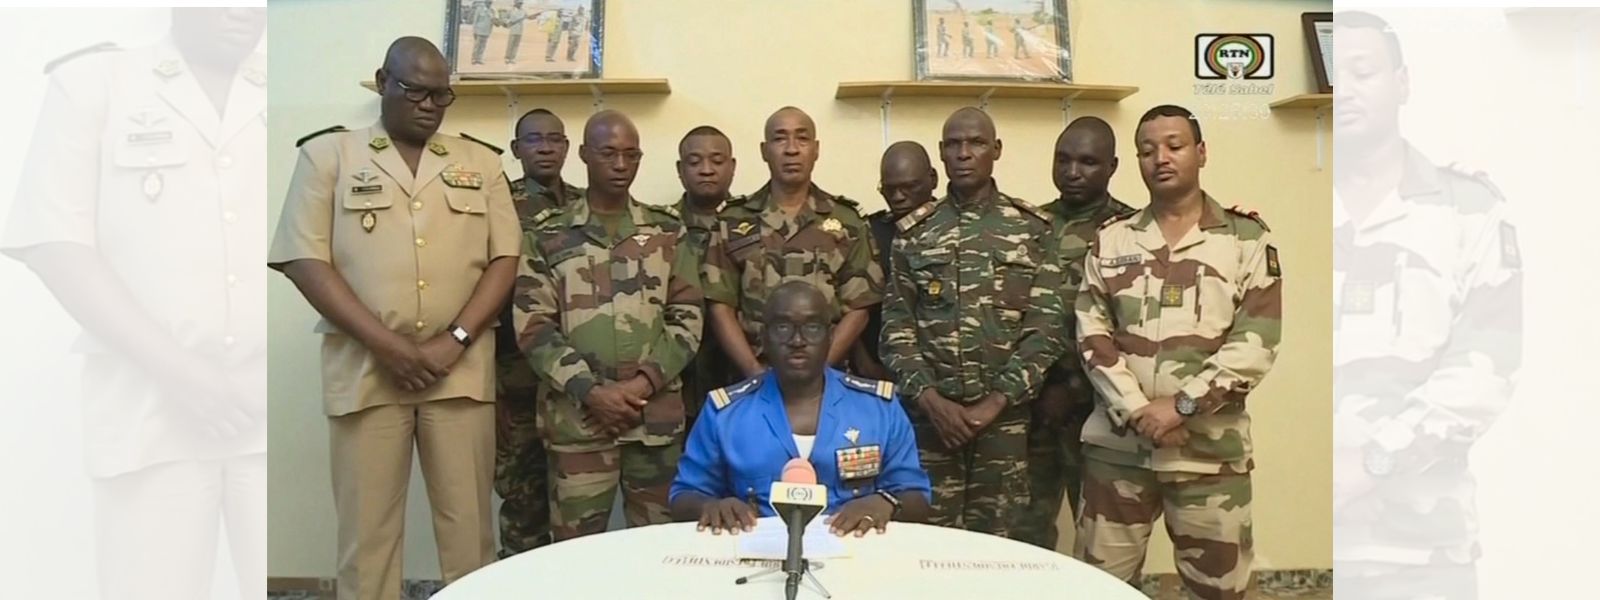 Military coup in Niger. President detained